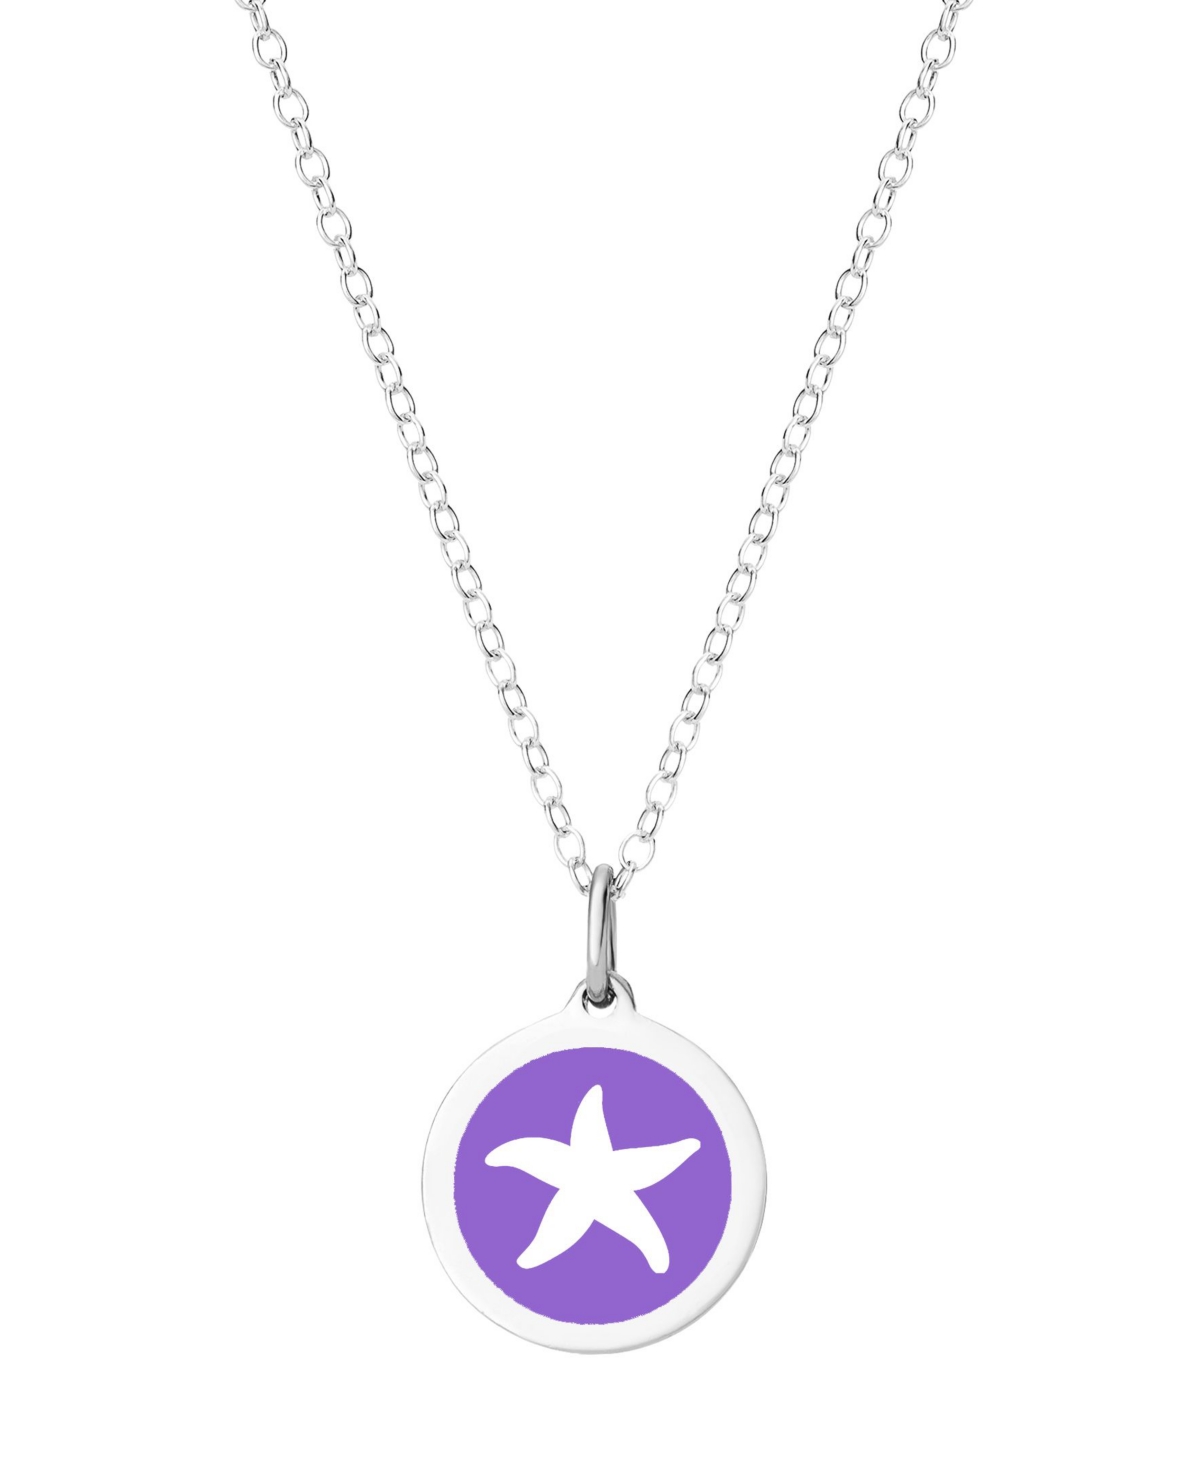 Mini Starfish Pendant Necklace in Sterling Silver and Enamel, 16" + 2" Extender - Radiant Or